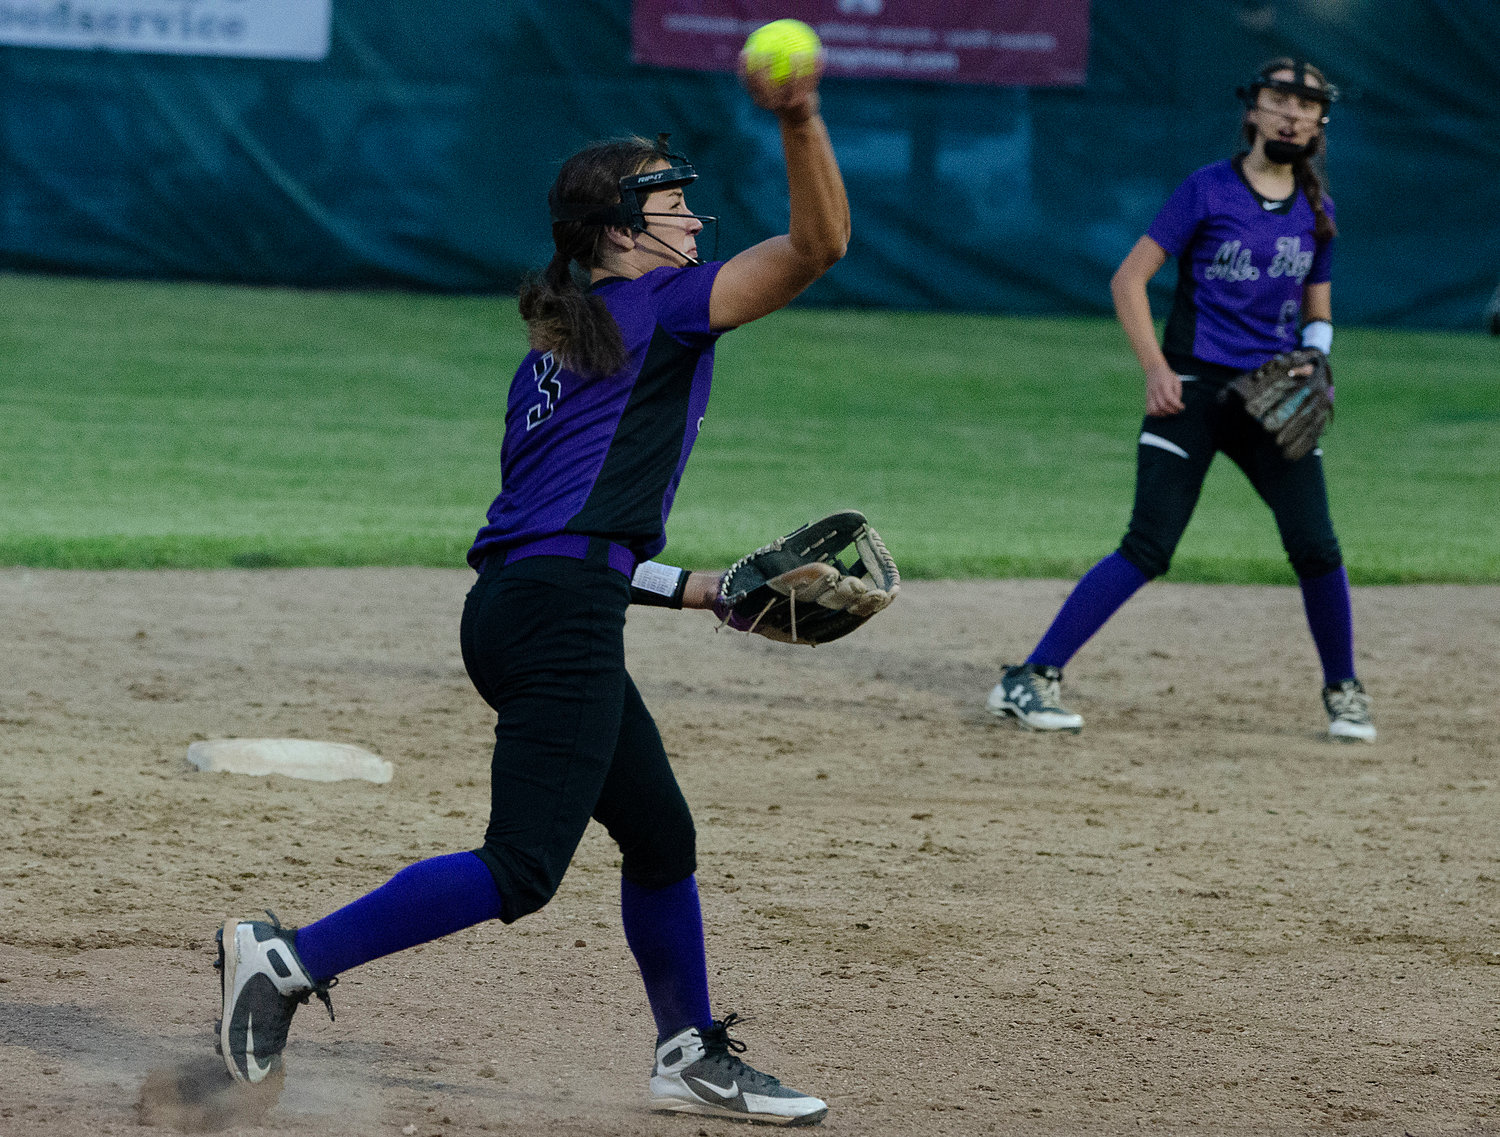 Huskies senior shortstop Izzy Savinon throws the ball to first for an out.